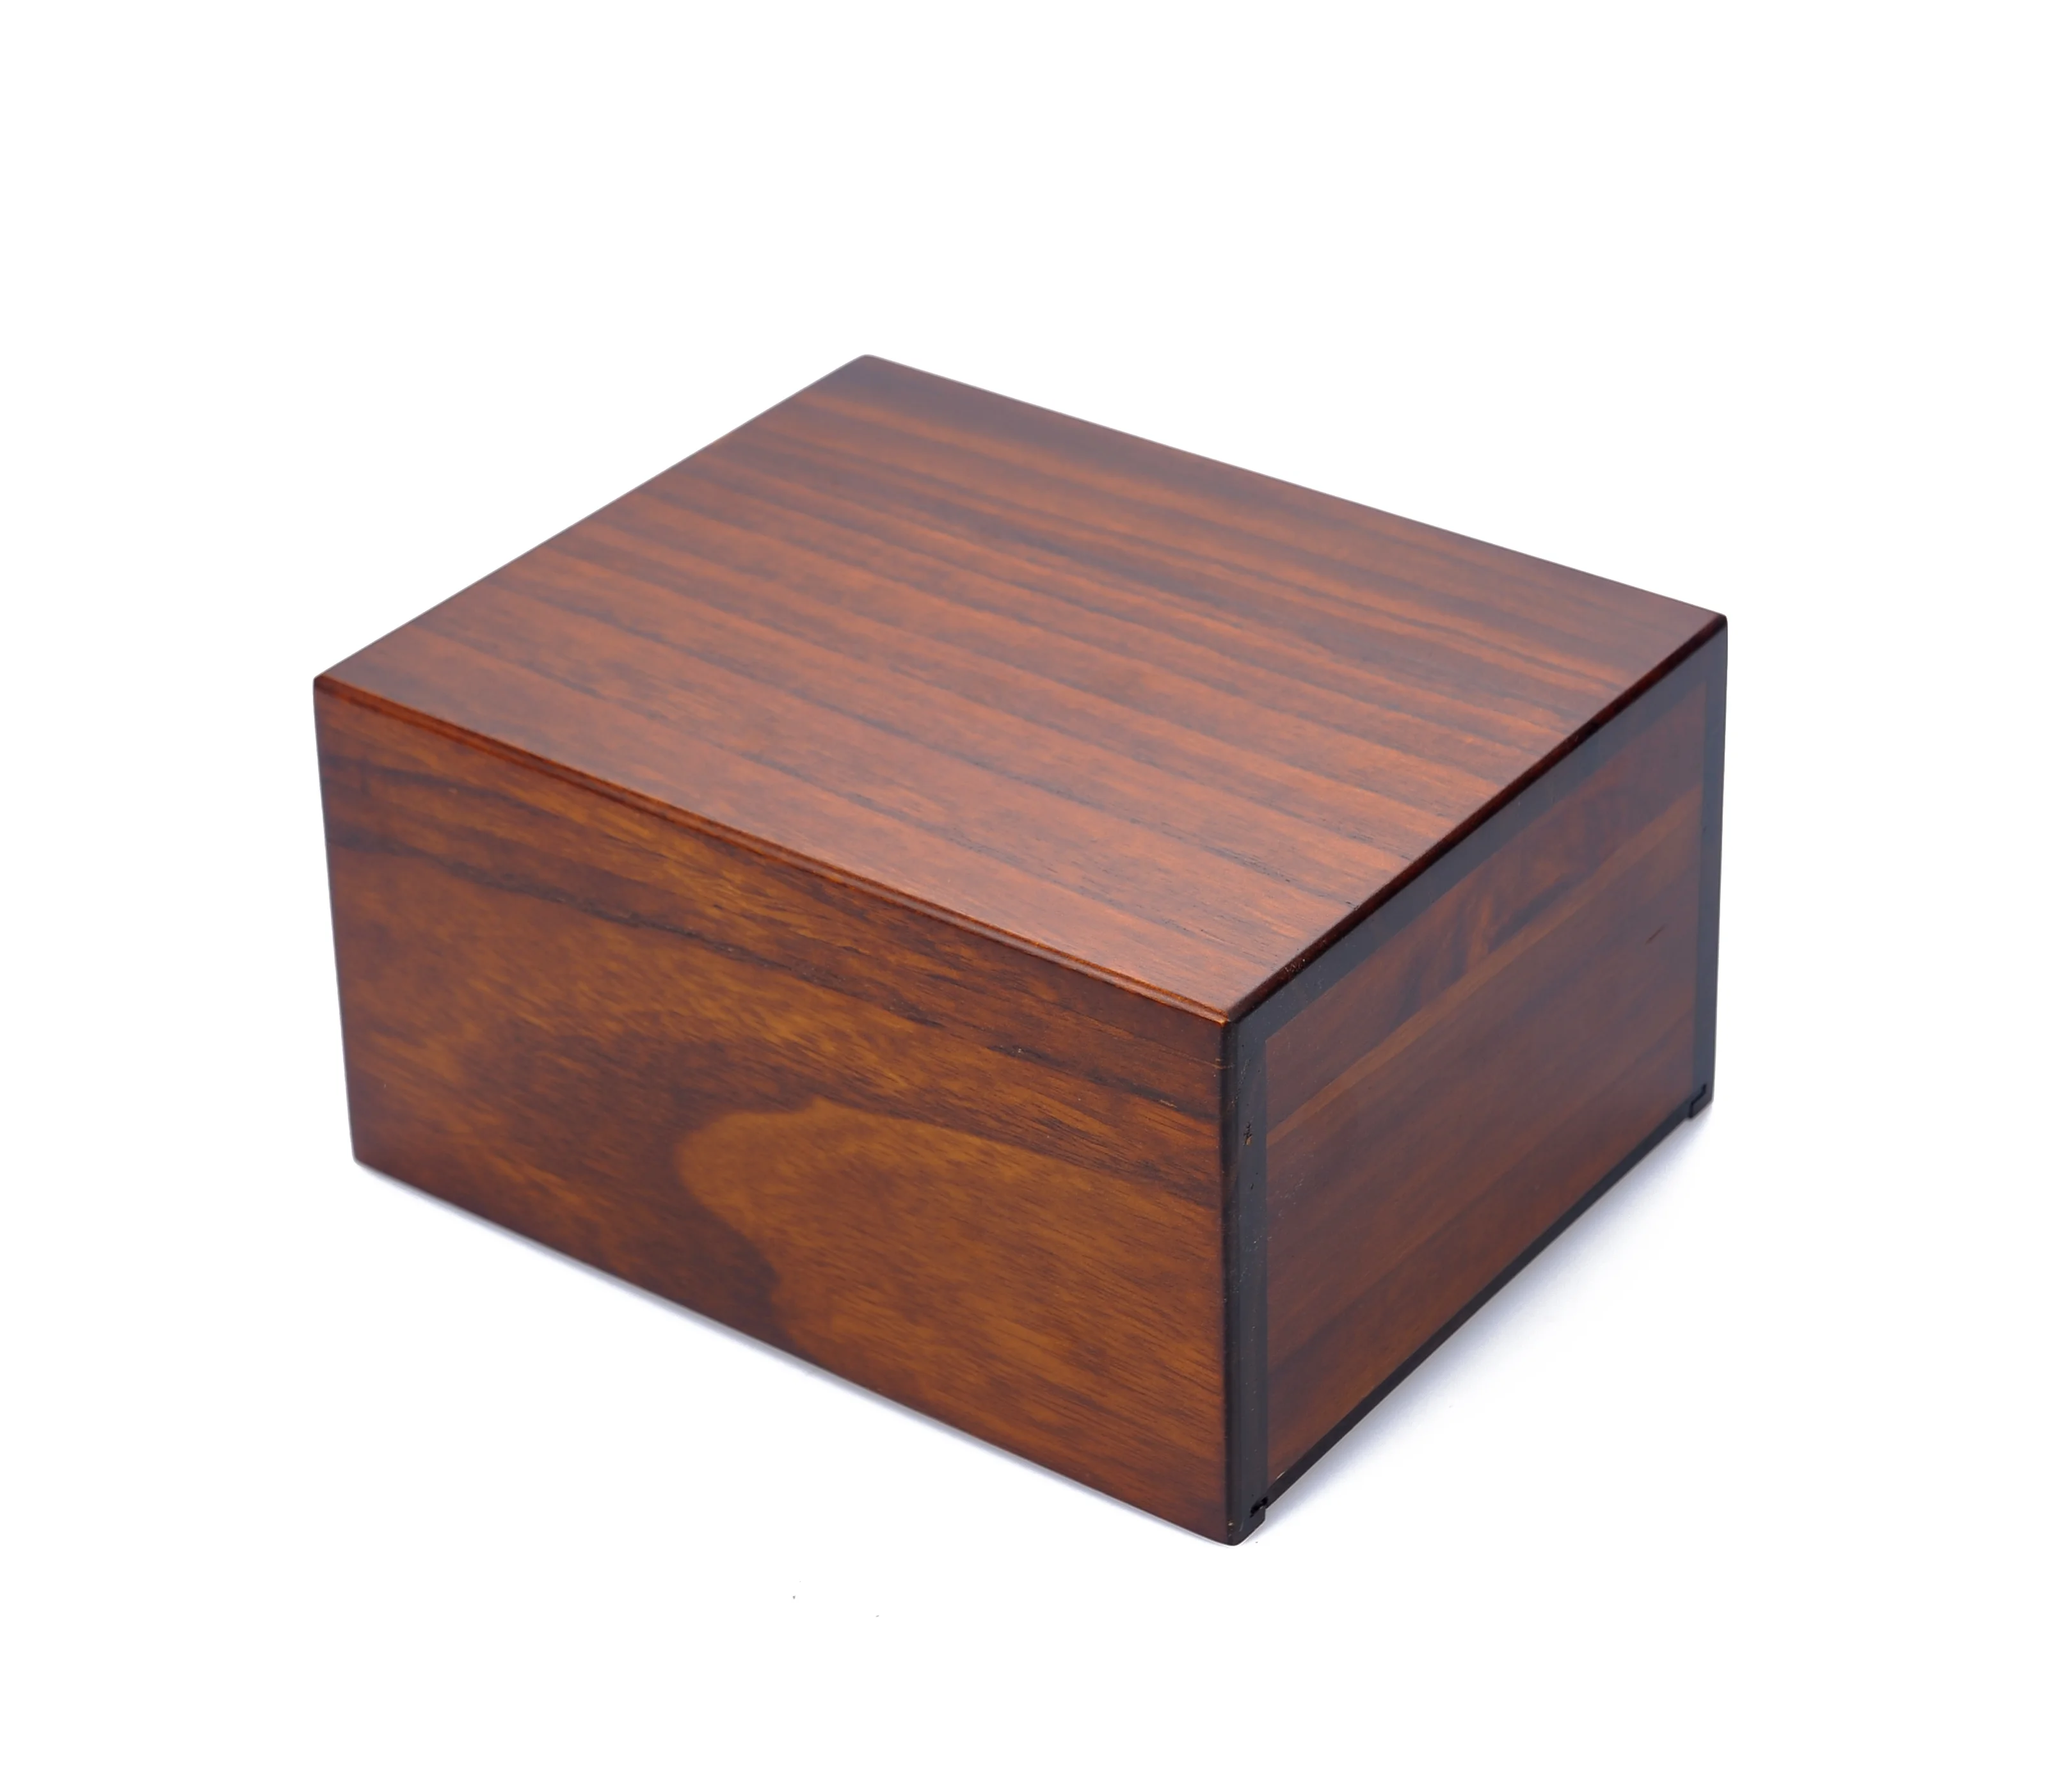 B051 Wholesale Funeral Cherry Pet Urn for Ashes Urnas para Mascotas Wooden Urn Box